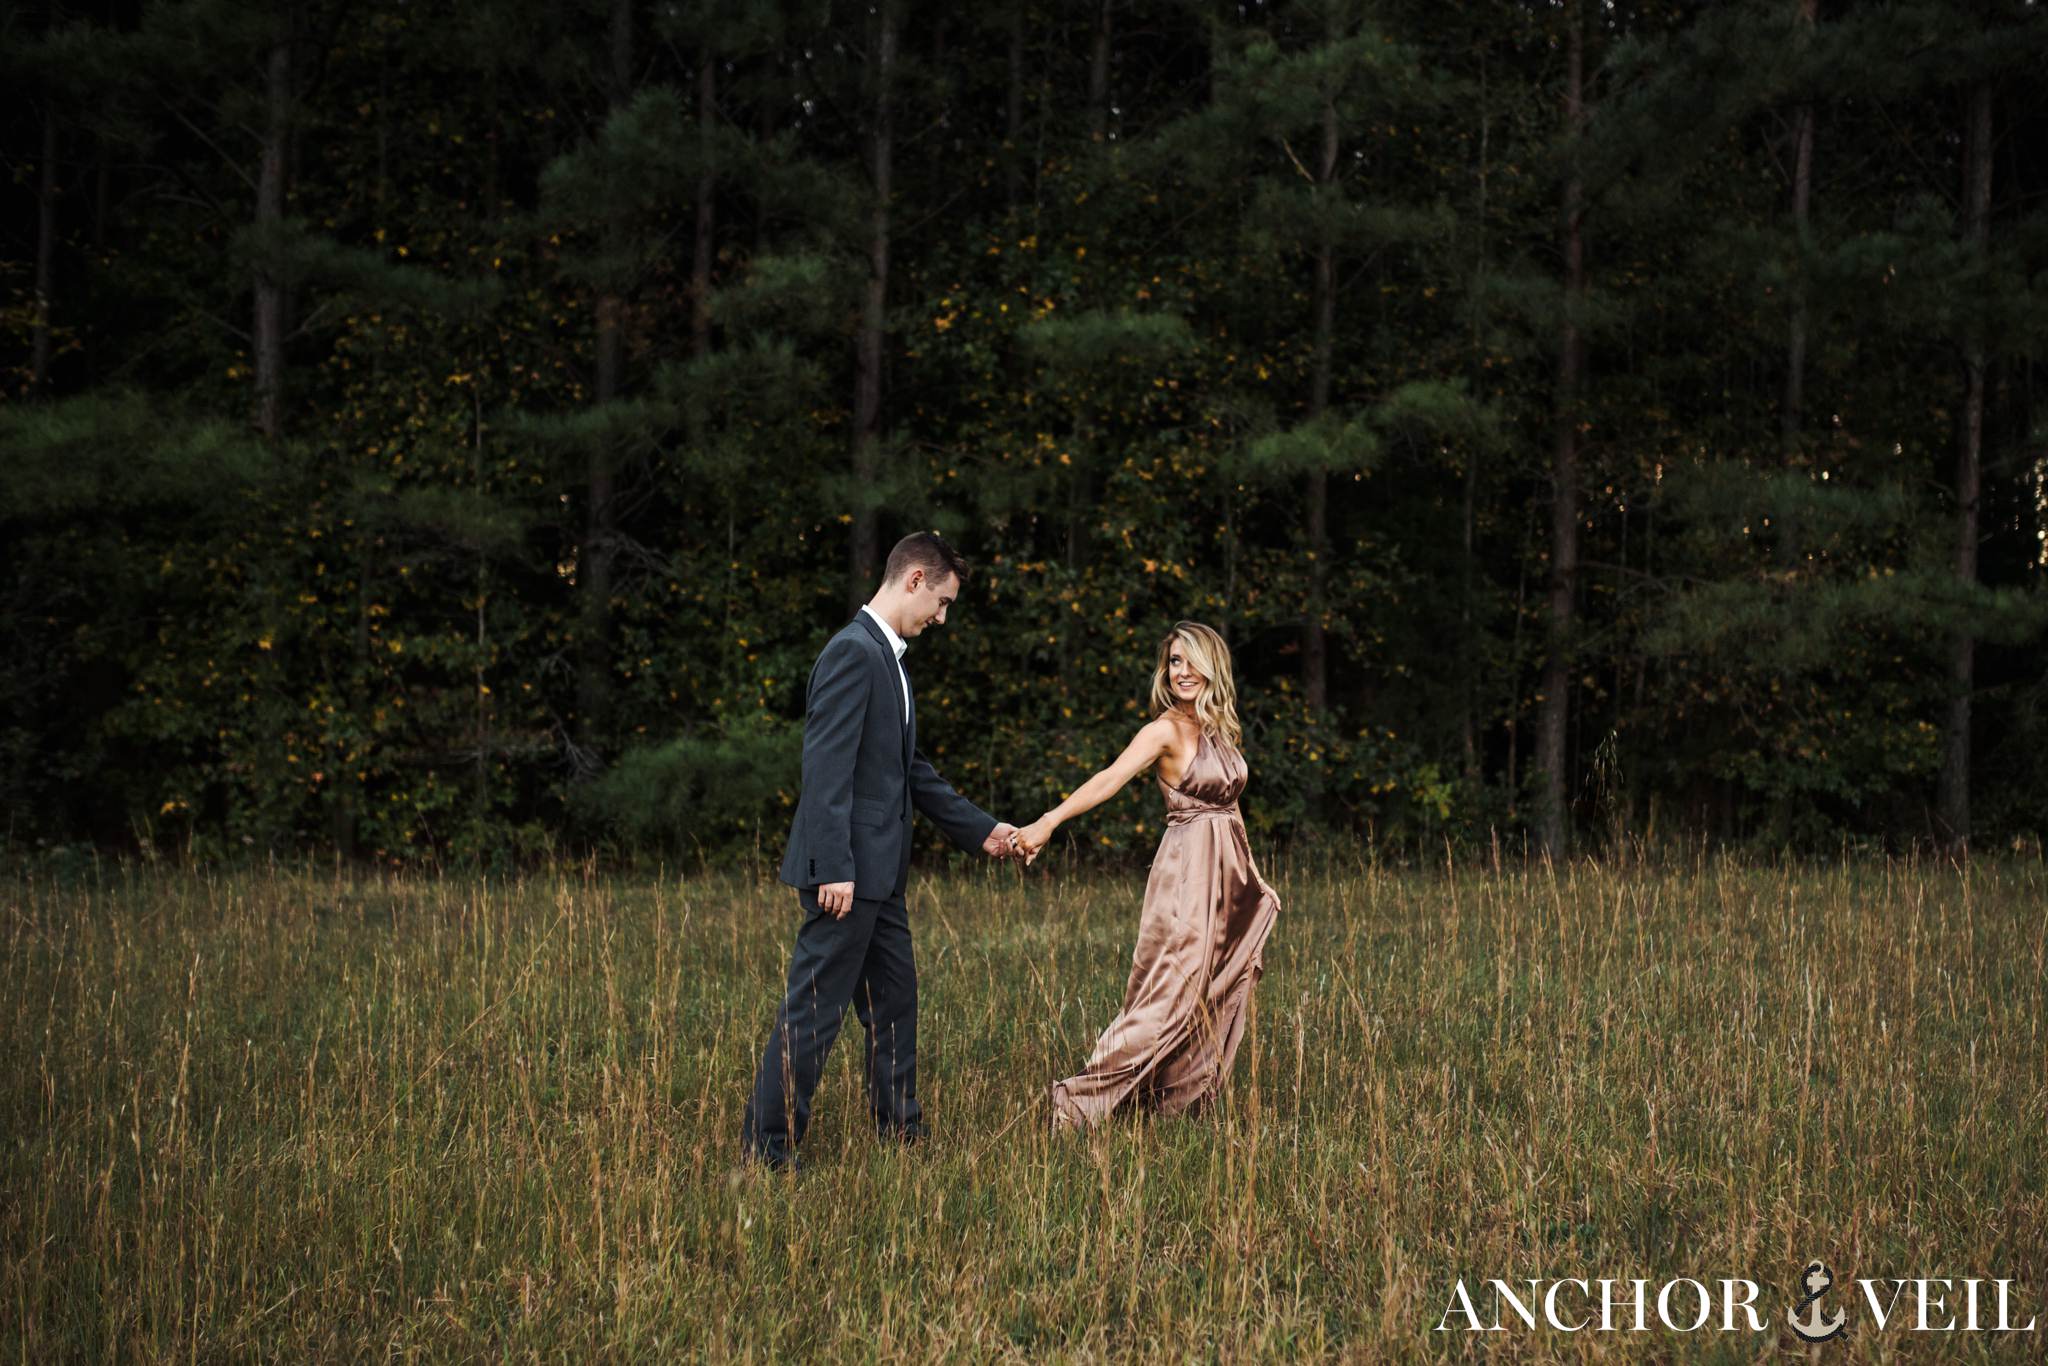 leading him by hand in the field in the tree forest during their charlotte engagement session